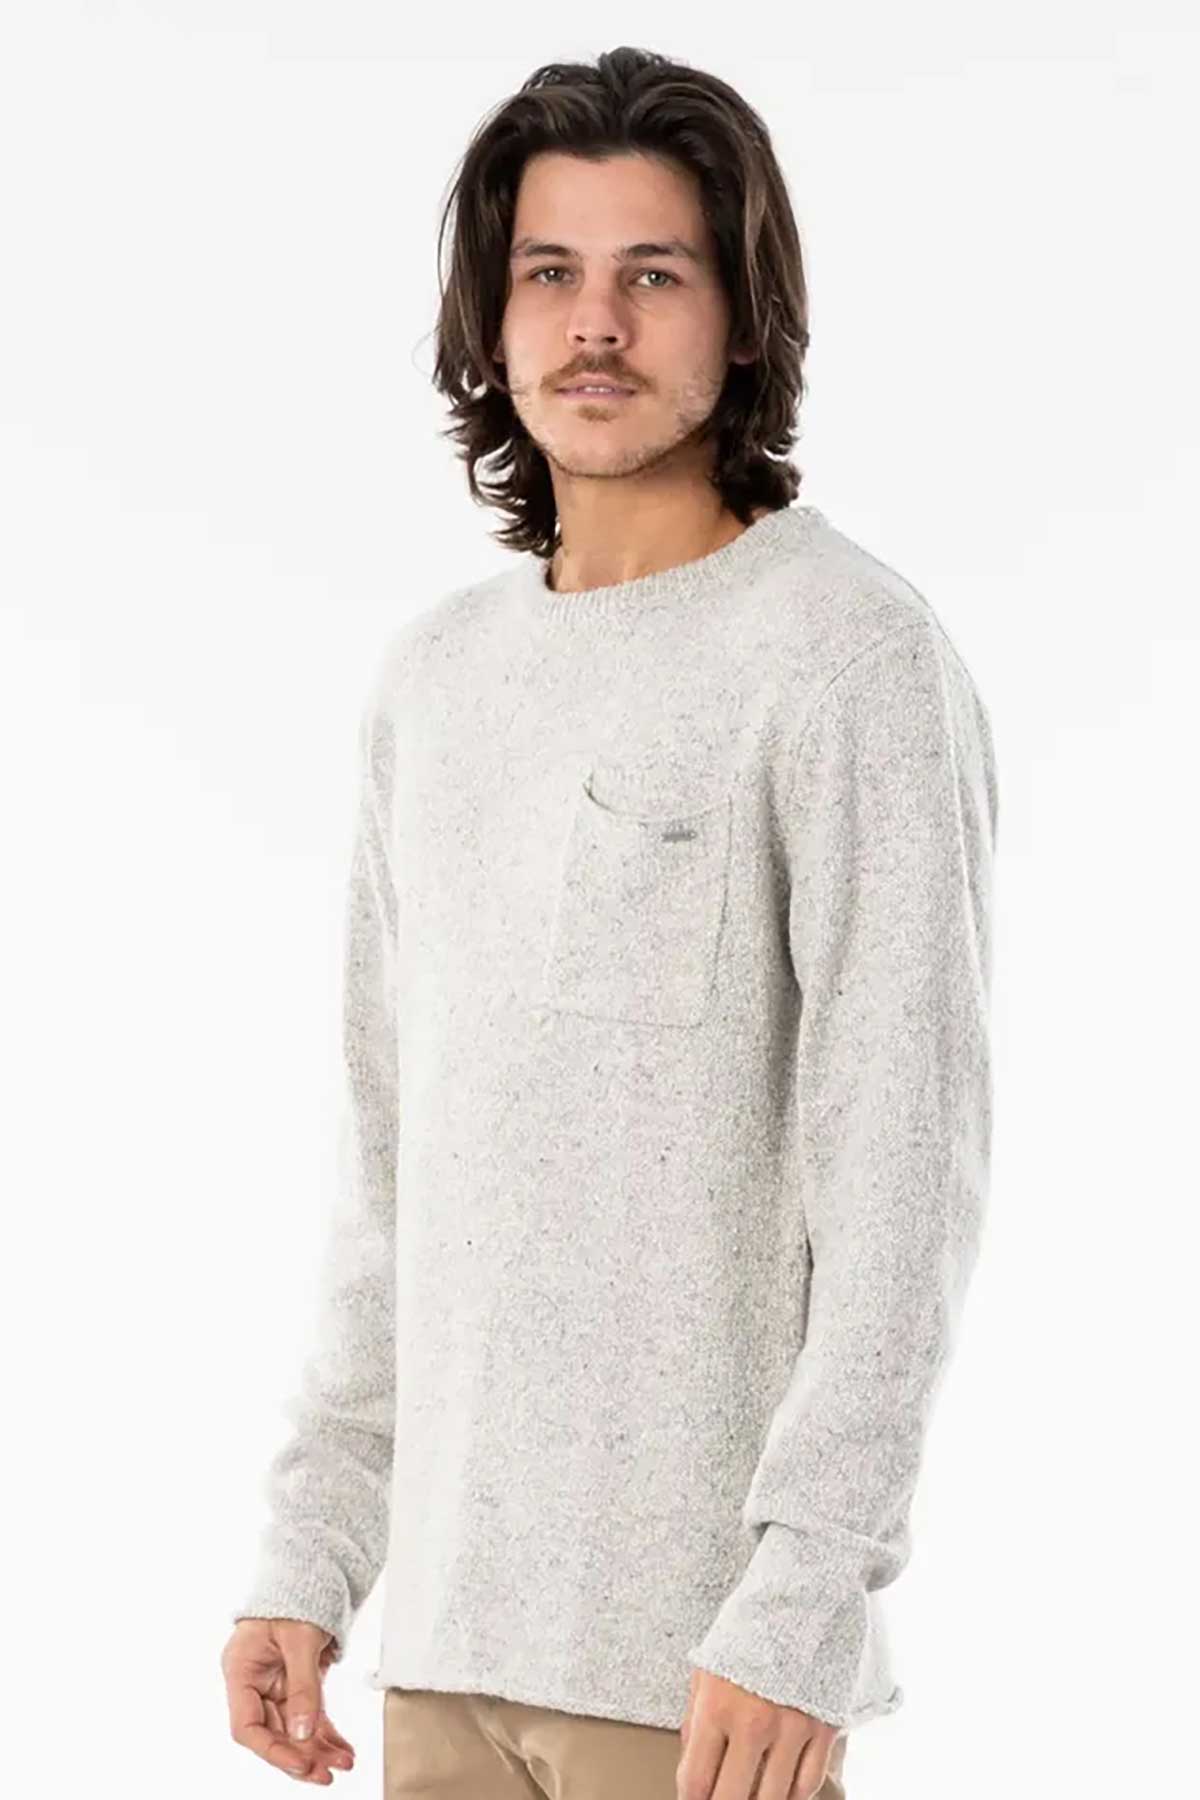 Rip Curl Knit Sweater - Neps Crew, chest pocket.